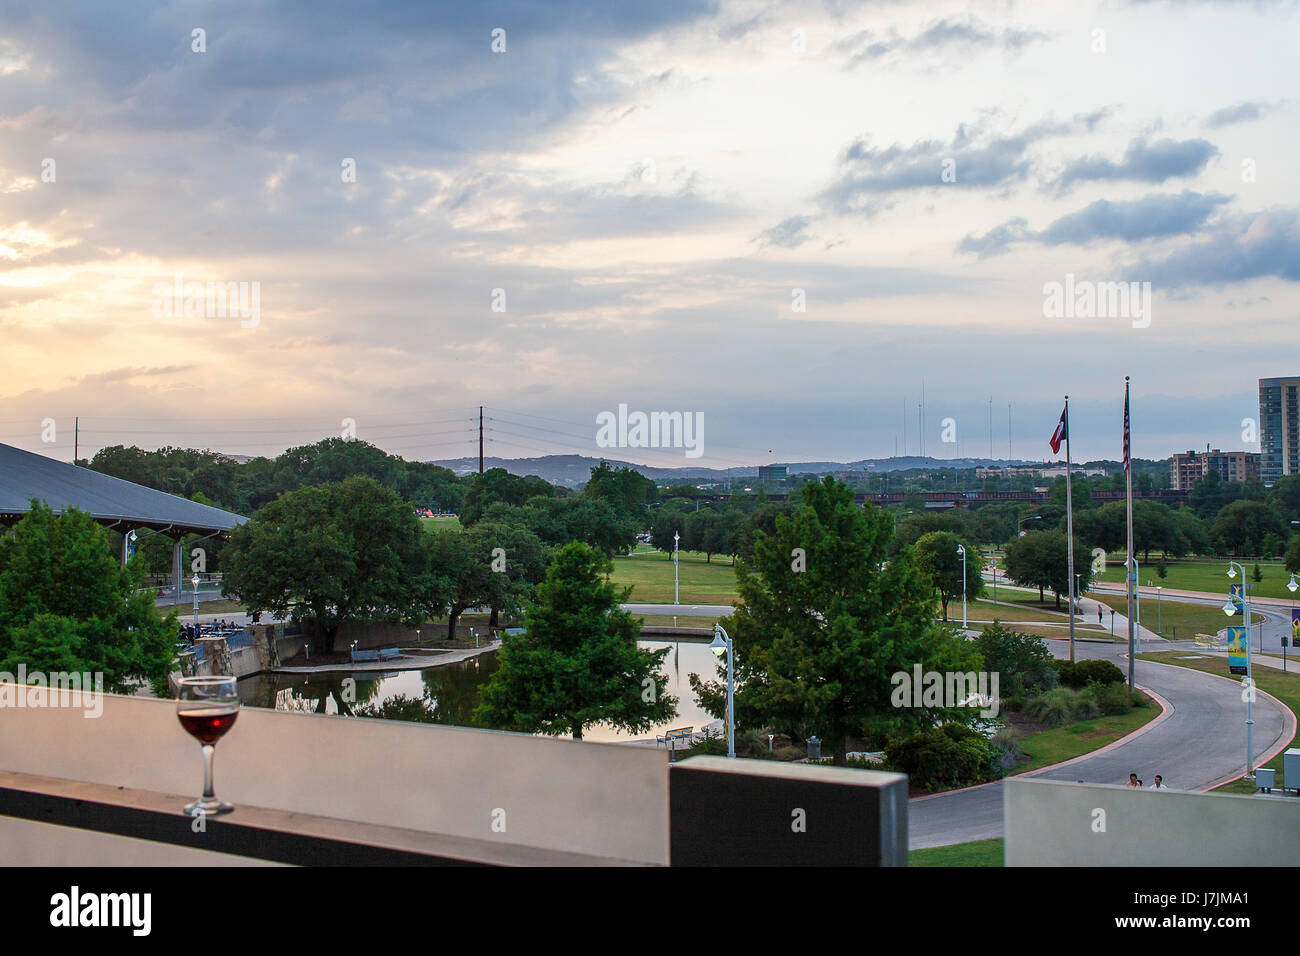 A glass of wine sits on the balcony overlooking the Palmer Event Center in Austin Texas Stock Photo